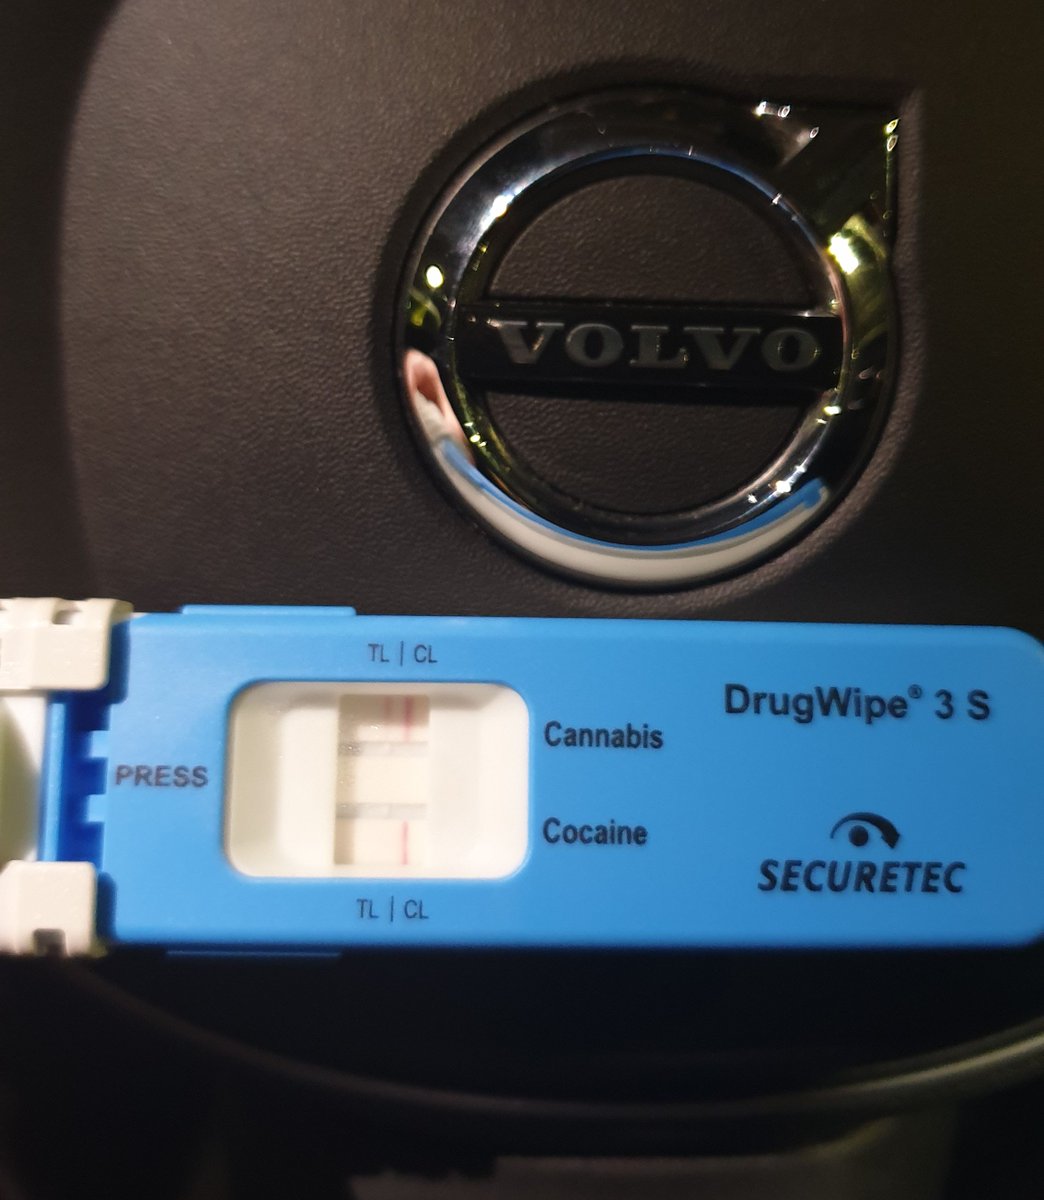 You may have seen this BMW being thrashed around St Helens yesterday afternoon. The driver tried to give false details but soon coughed who he really was when the fingerprint device came out. He was disqualified and also tested positive for Cannabis #arrested #drugwipe #seized